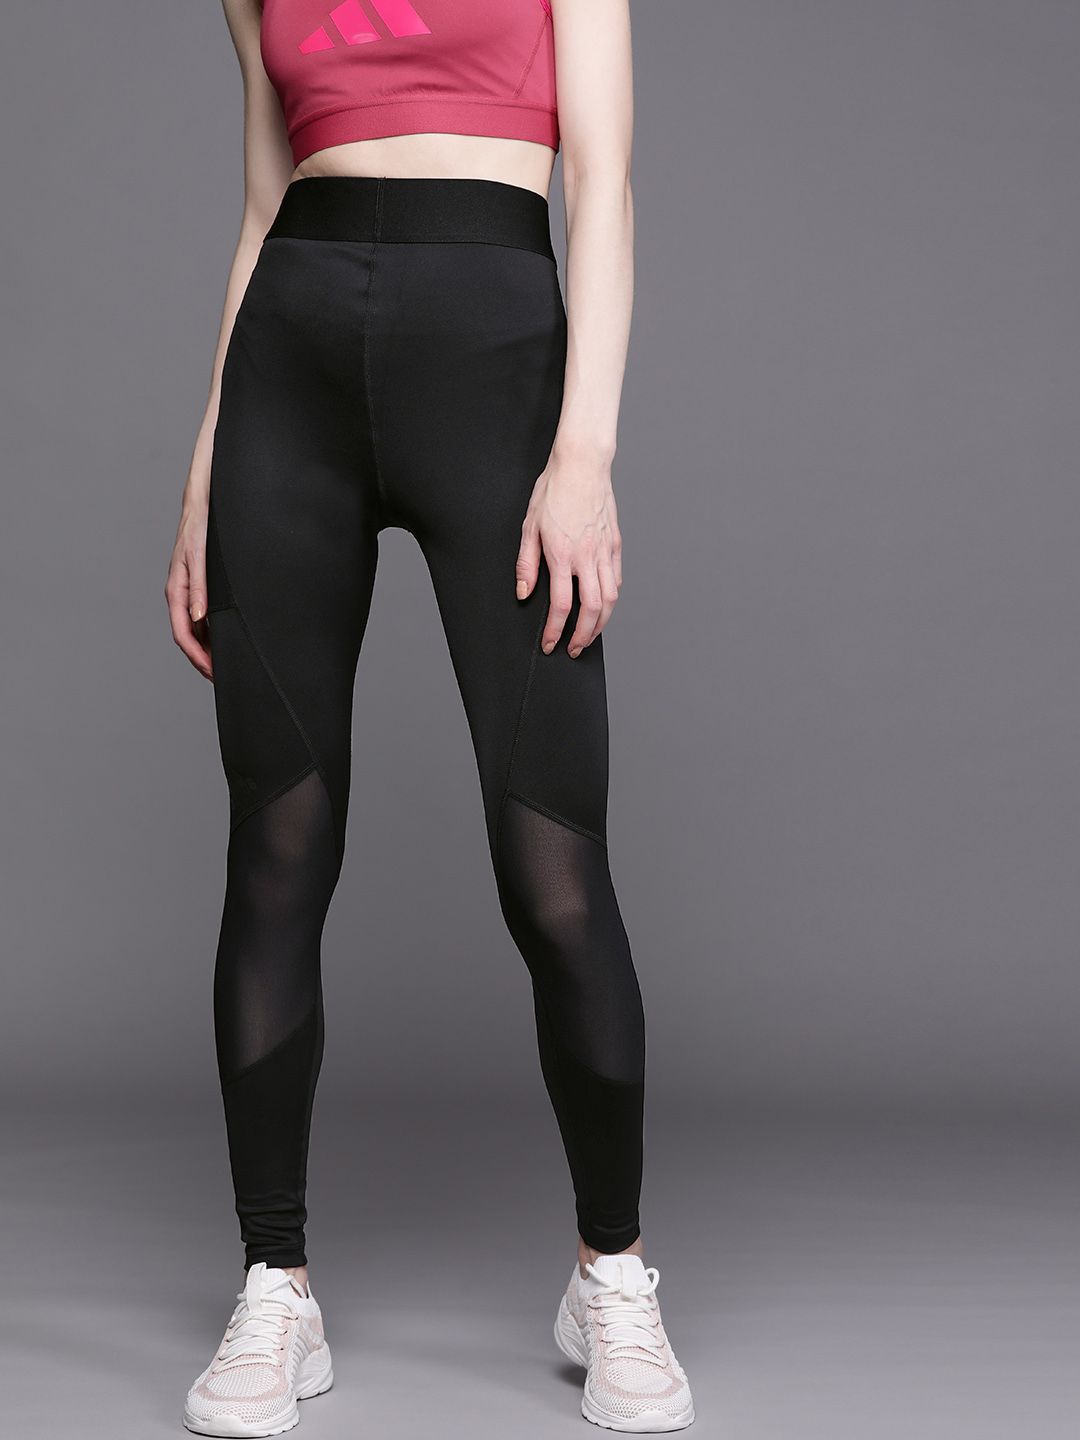 ADIDAS Women Black Solid Techfit Period-Proof 7/8 Sustainable Tights Price in India